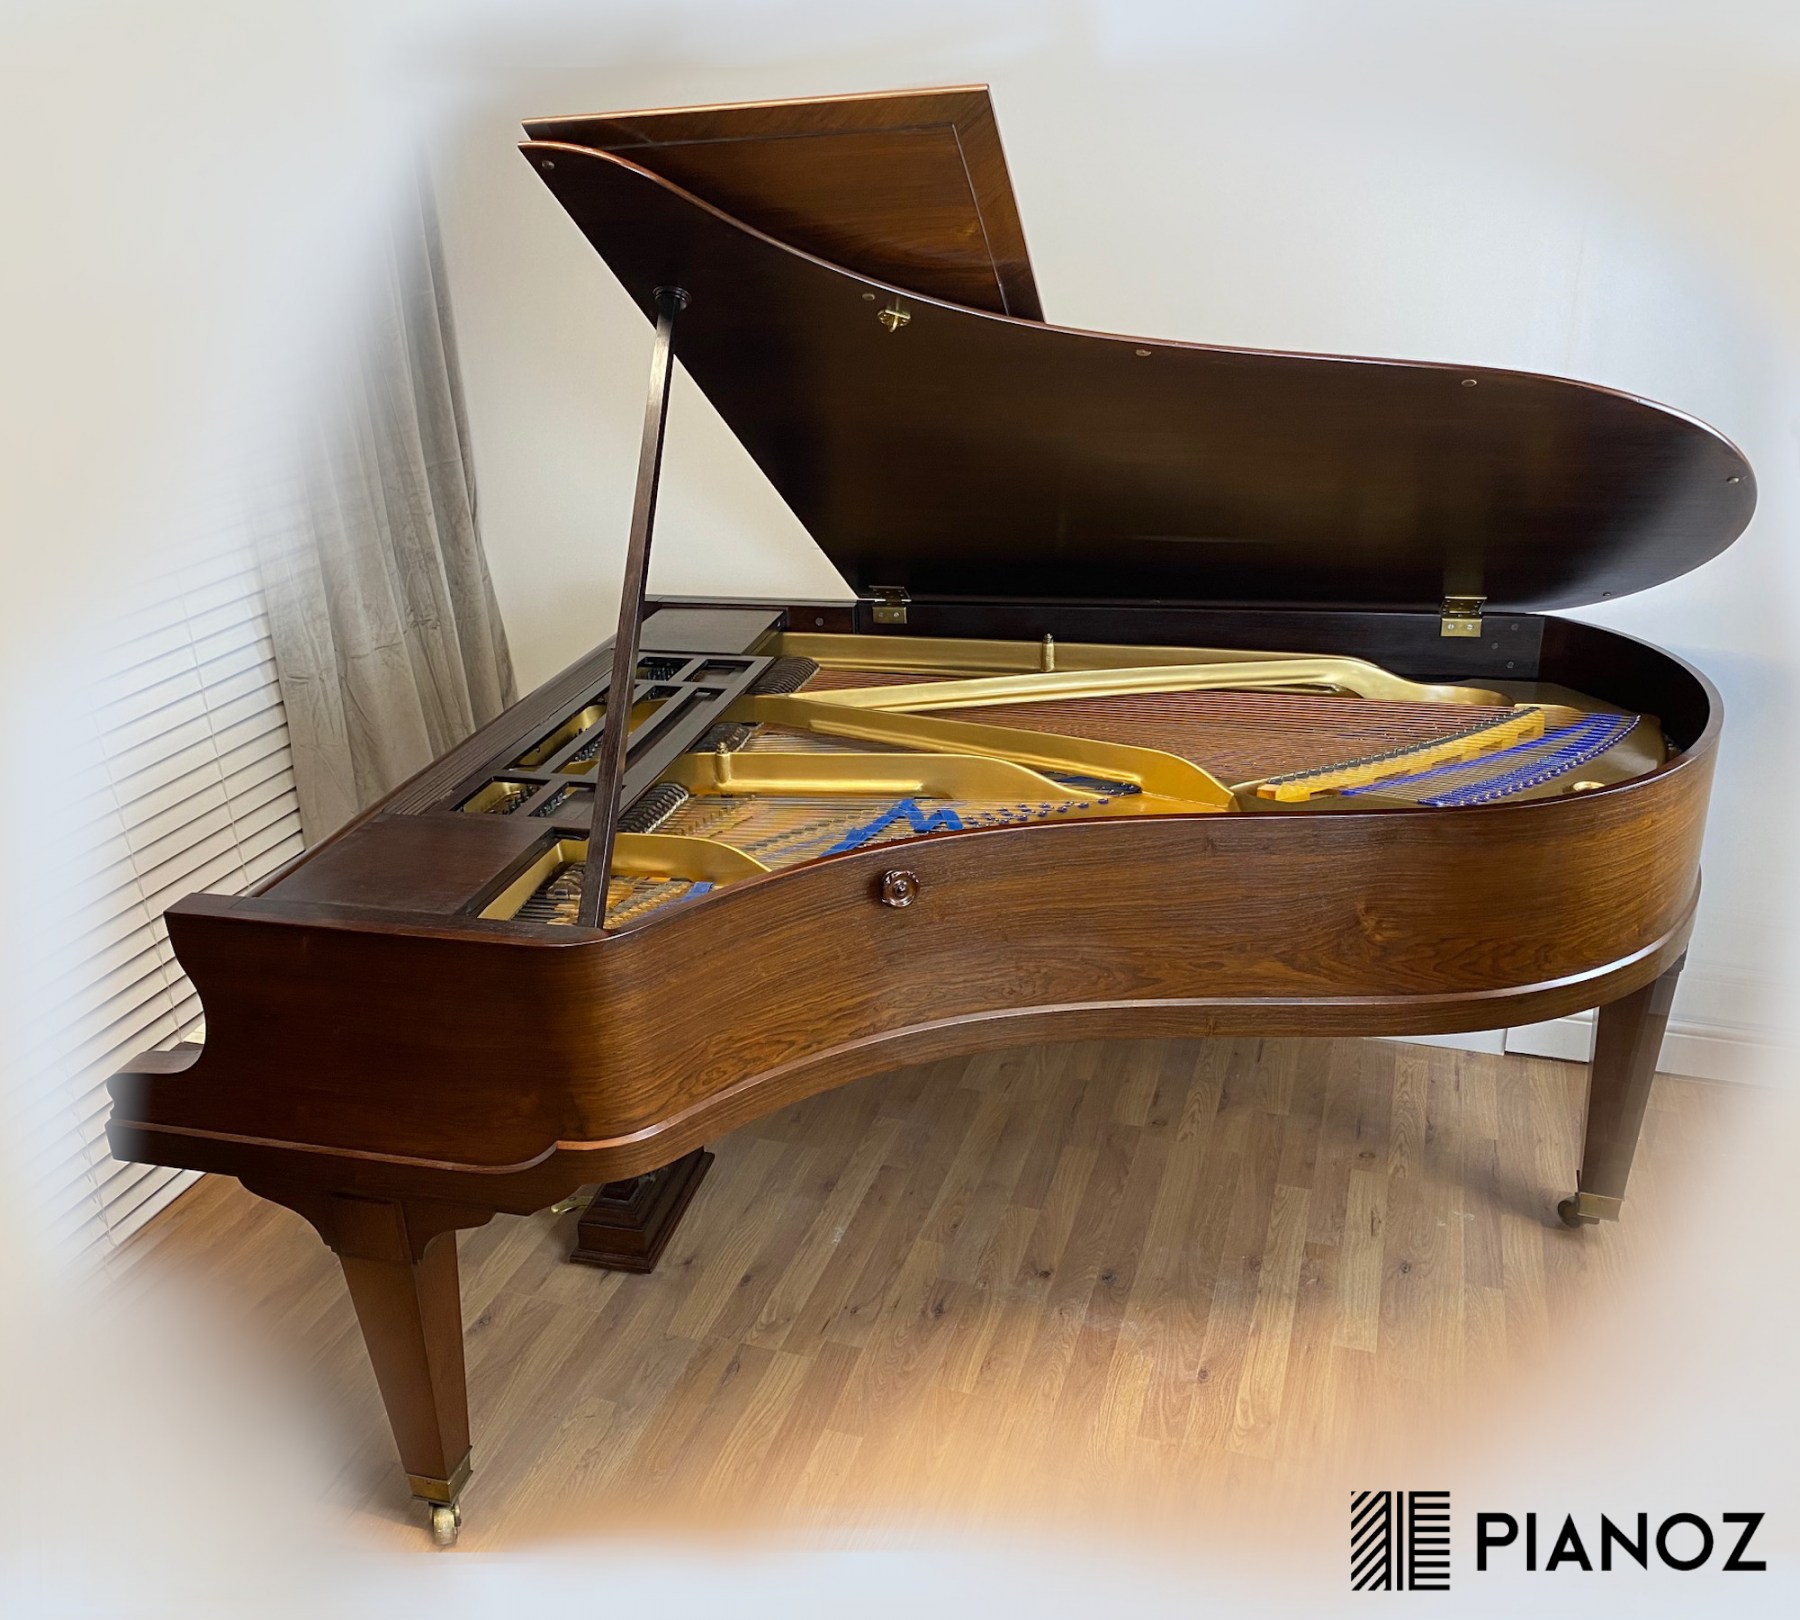 Bluthner Semi Concert Grand piano for sale in UK